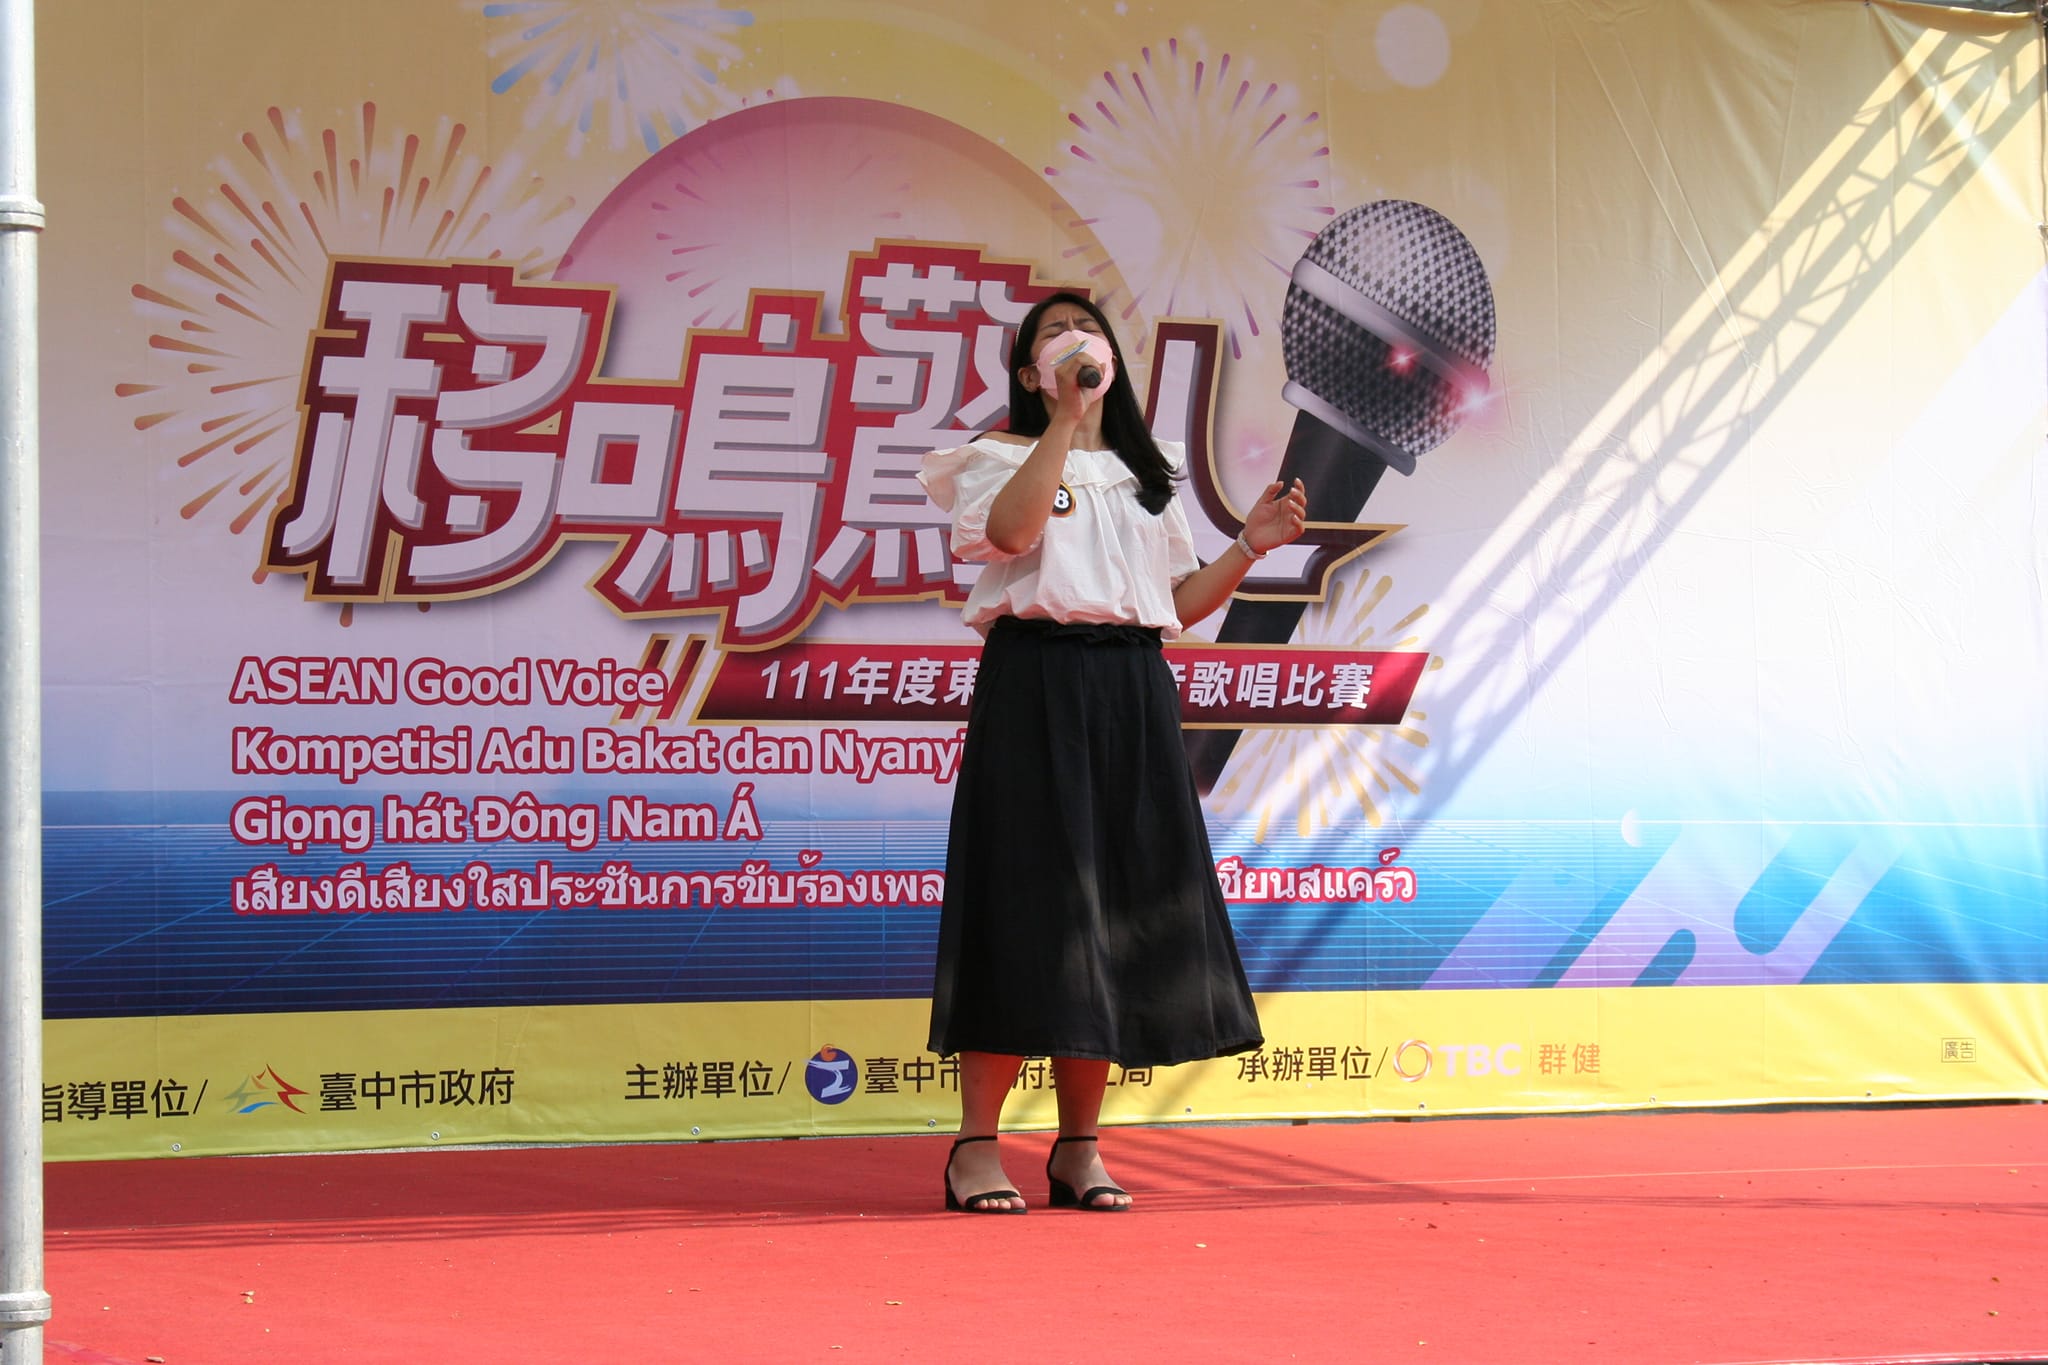 ASEAN Good Voice Singing Contest invites new immigrants and migrant workers to show their talents.  Photo reproduced from Taiwan Radio, Taichung Radio Station (台灣廣播公司台中電台) Facebook